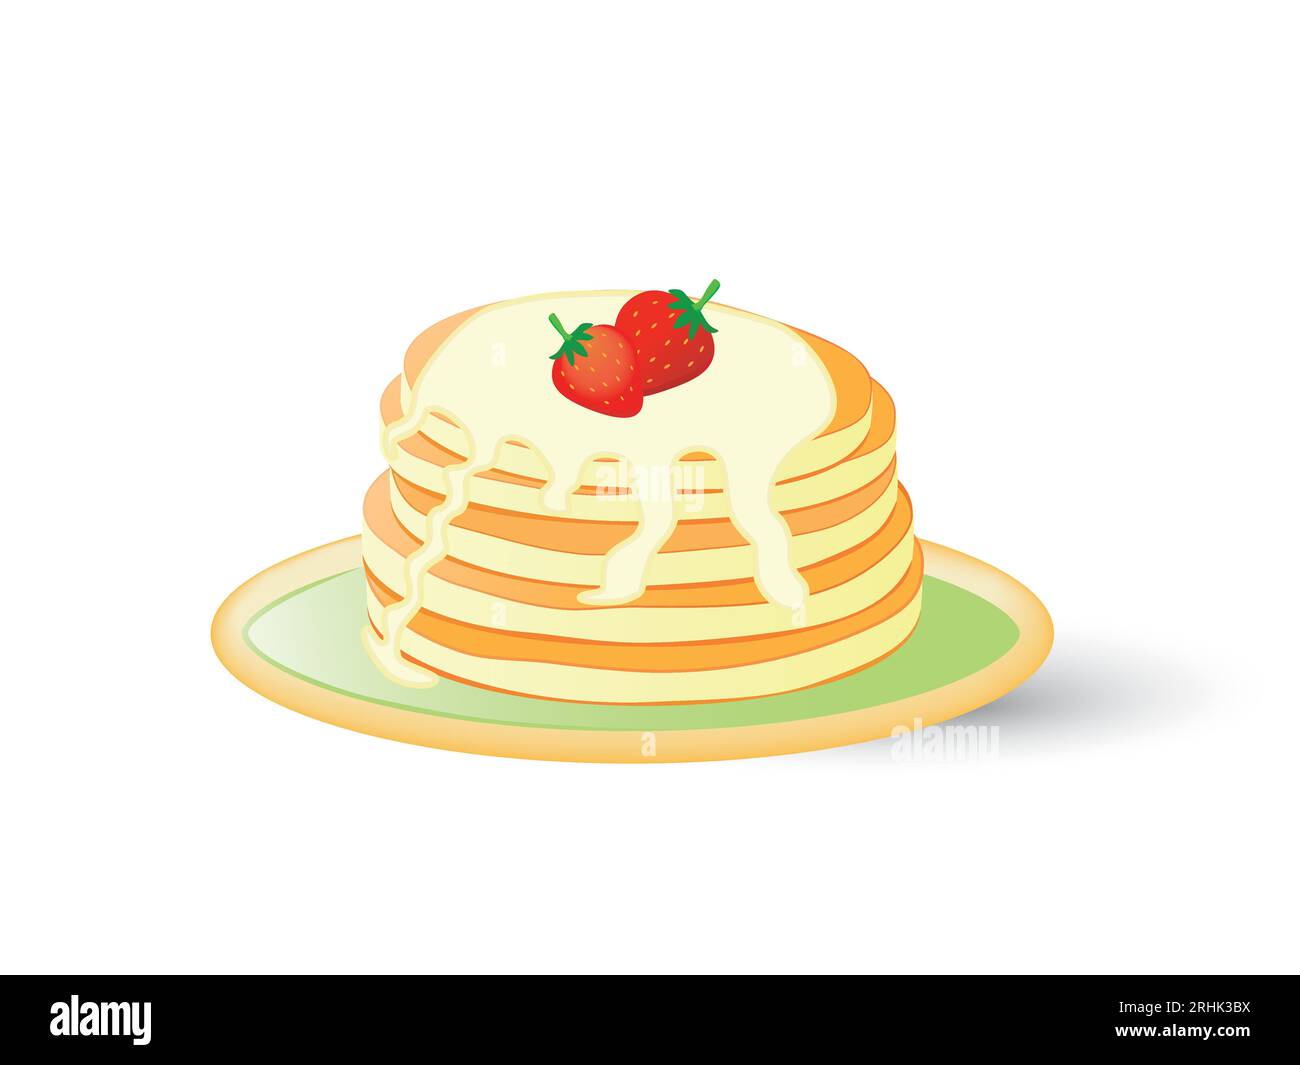 Pancakes on a plate poured with syrup and garnished with strawberries Stock Vector